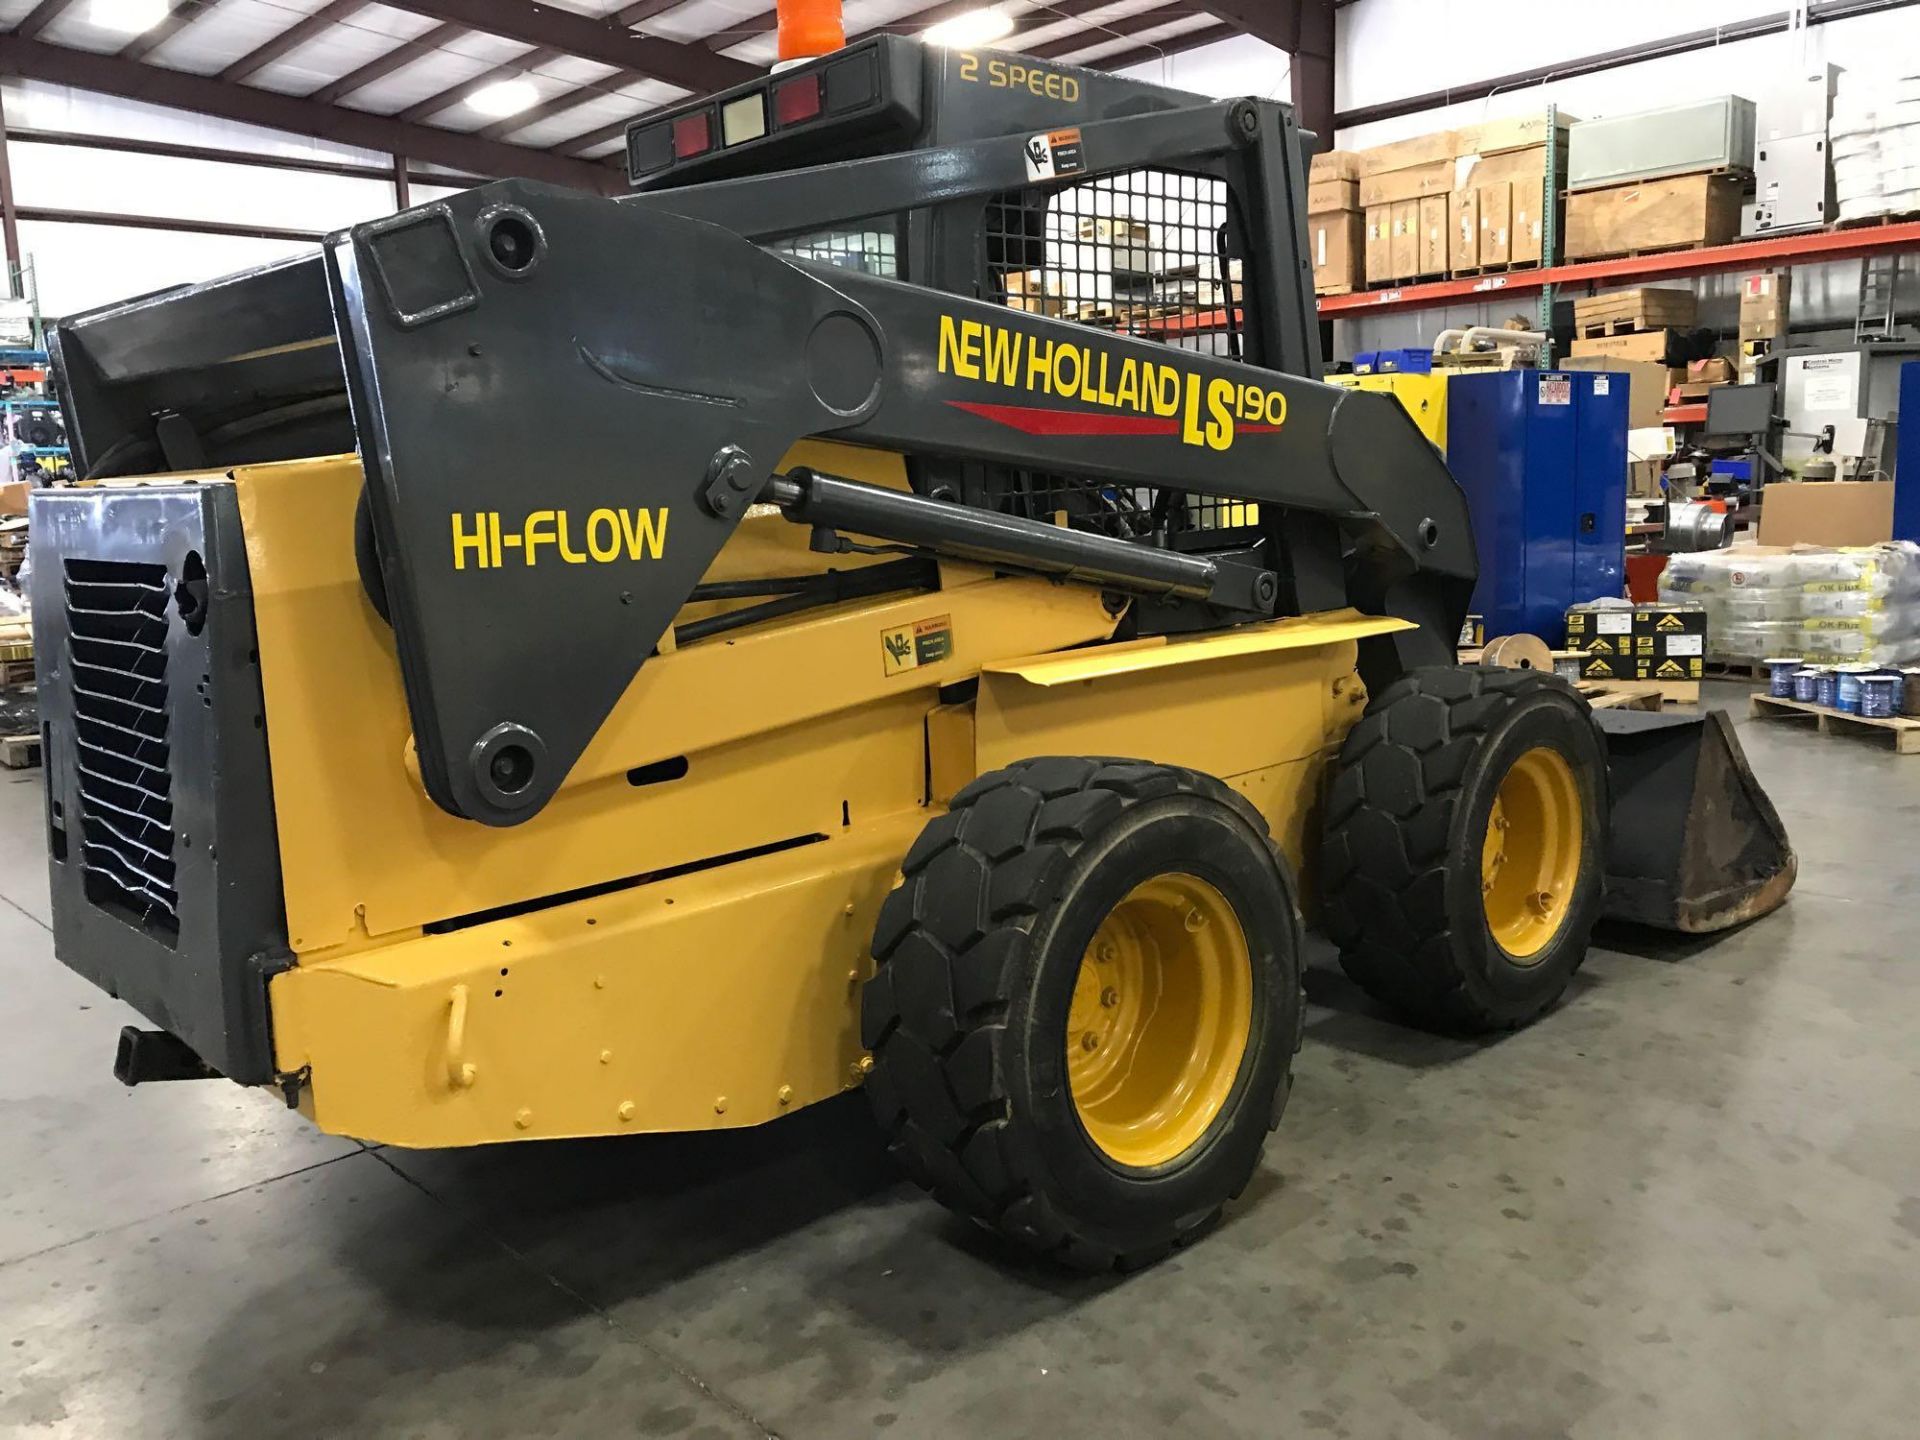 2006 NEW HOLLAND LS190 SKID STEER, DIESEL, QUICK COUPLER, AUX. HIGH FLOW HYDRAULICS - Image 2 of 7